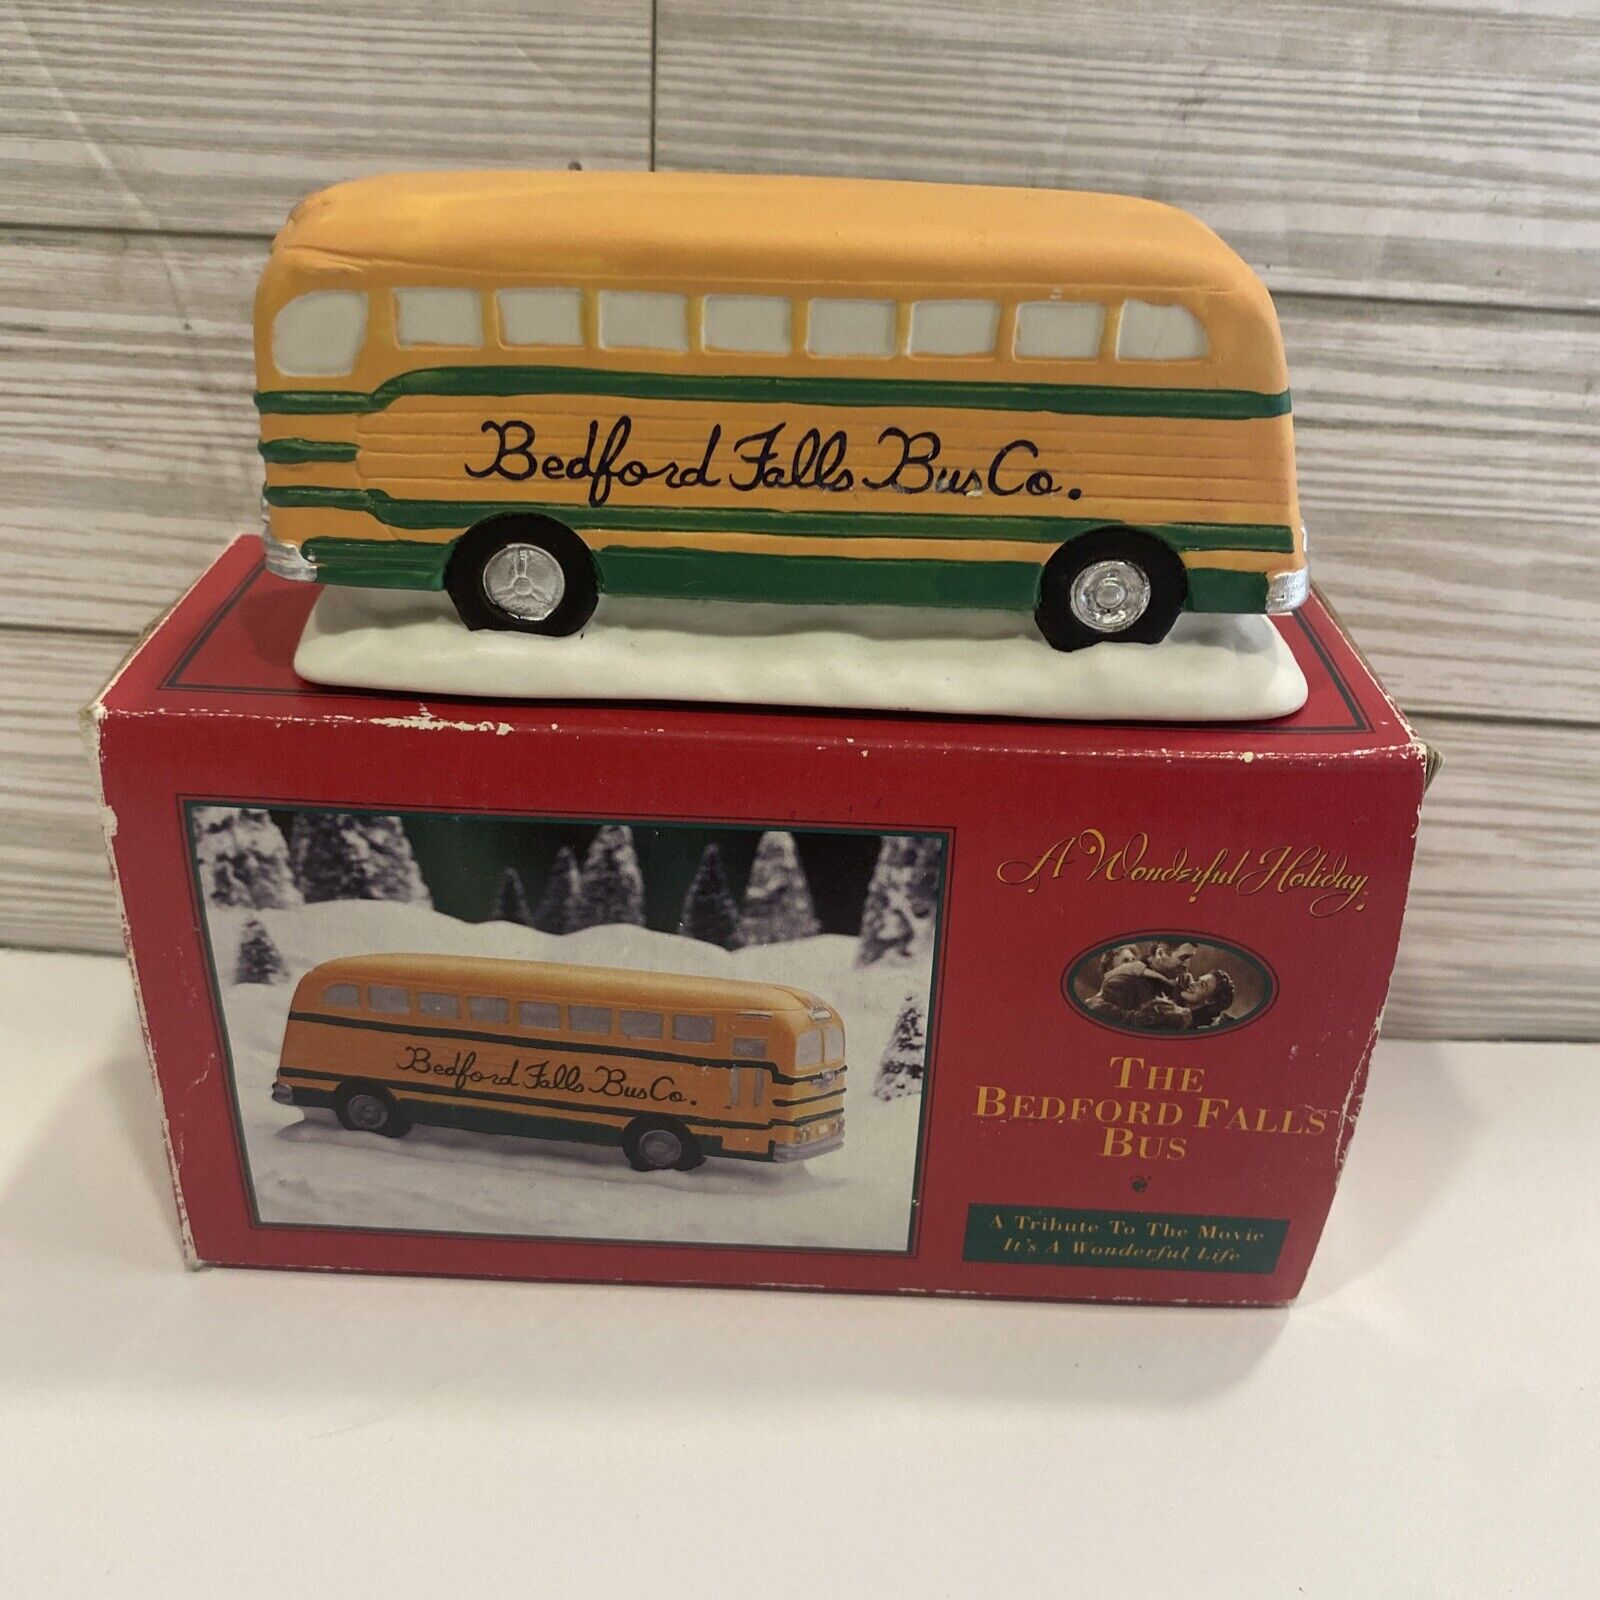 A Wonderful Holiday “It's A Wonderful Life” The Bedford Falls Bus 1994 With Box